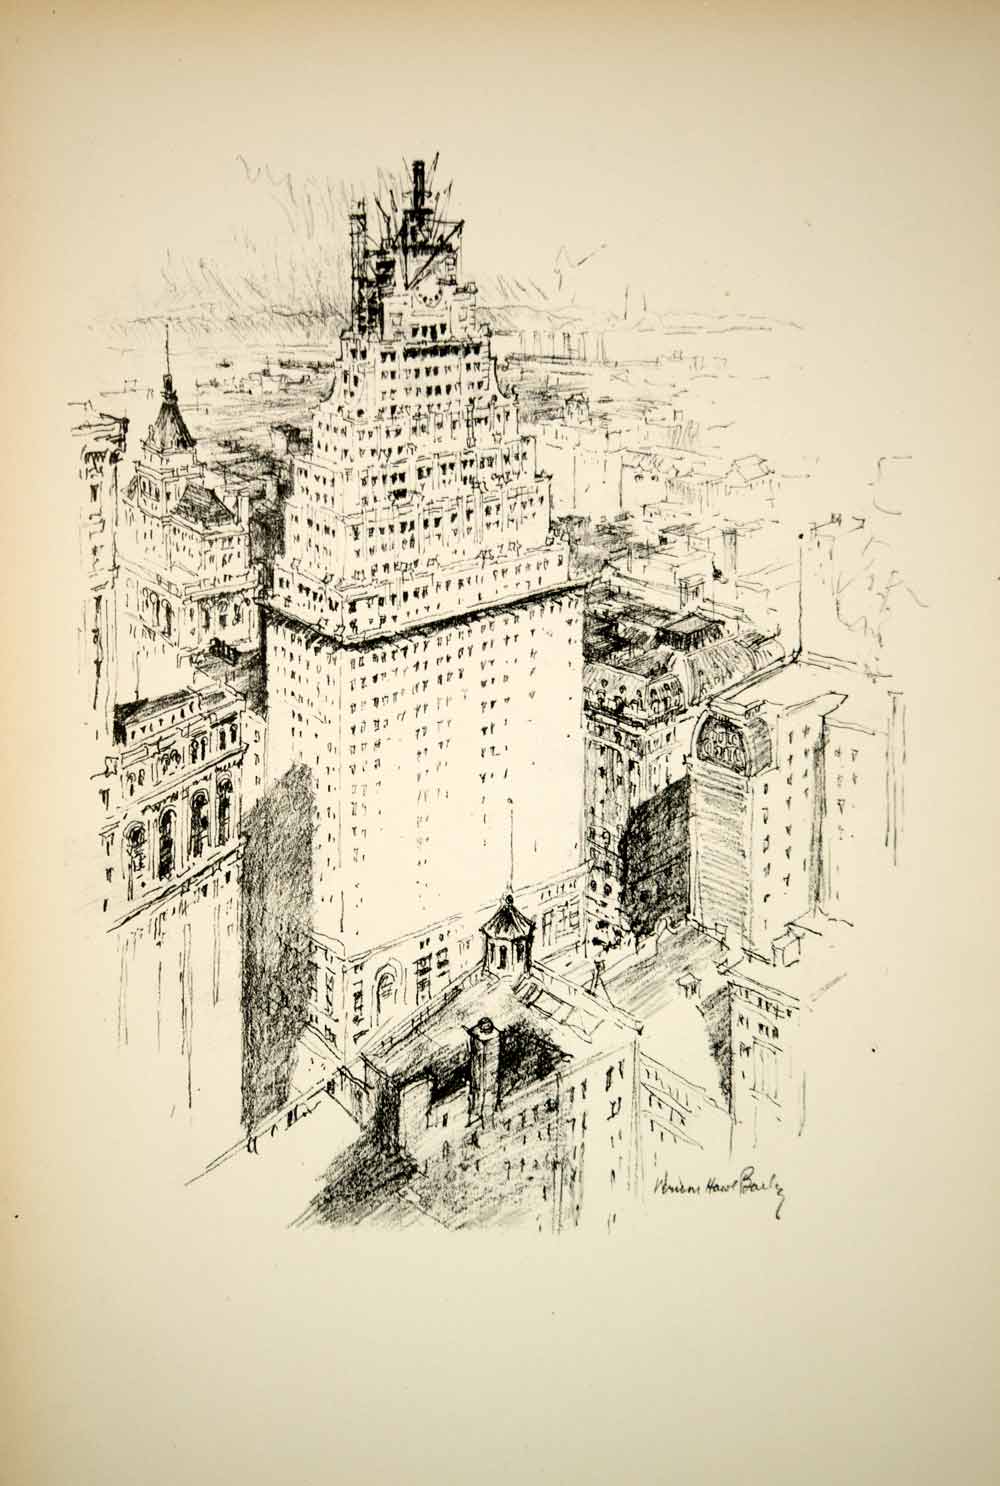 1928 Photolithograph Paramount Building Construction NYC Vernon Howe Bailey NYS1